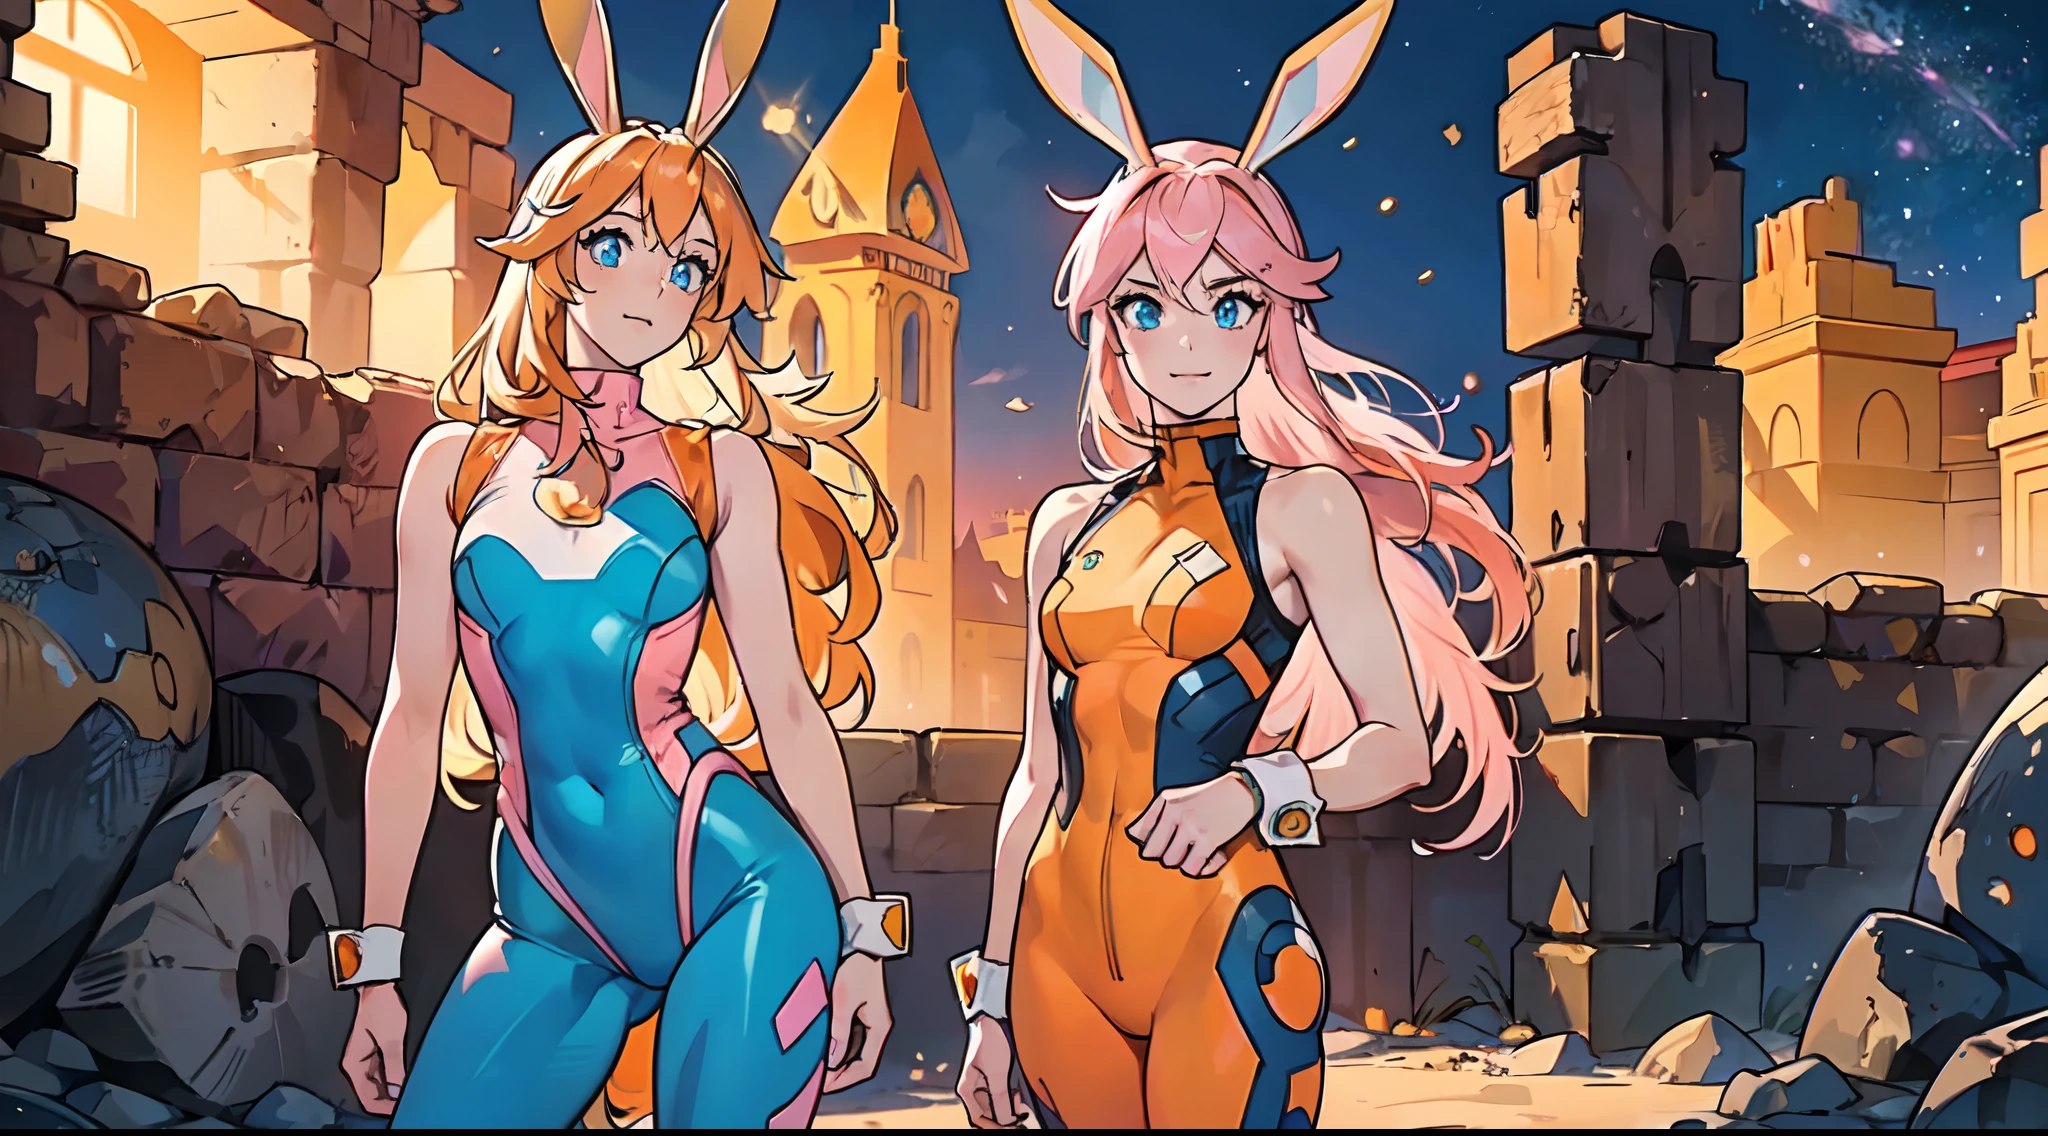 ((Best Quality)), ((Masterpiece)), ((Realistic)) 1woman, cute face, determined look, smile, adult mature female (spiky orange-pink hair, ((orange-pink mullet 1.1)), (mid length hair), blue eyes, (white/yellow pupil,) hero, sleeveless blue spandex bodysuit, long orange-pink (((rabbit ears,))) desert village, tbcc illustration, standing in a villa doorway, night, middle eastern,